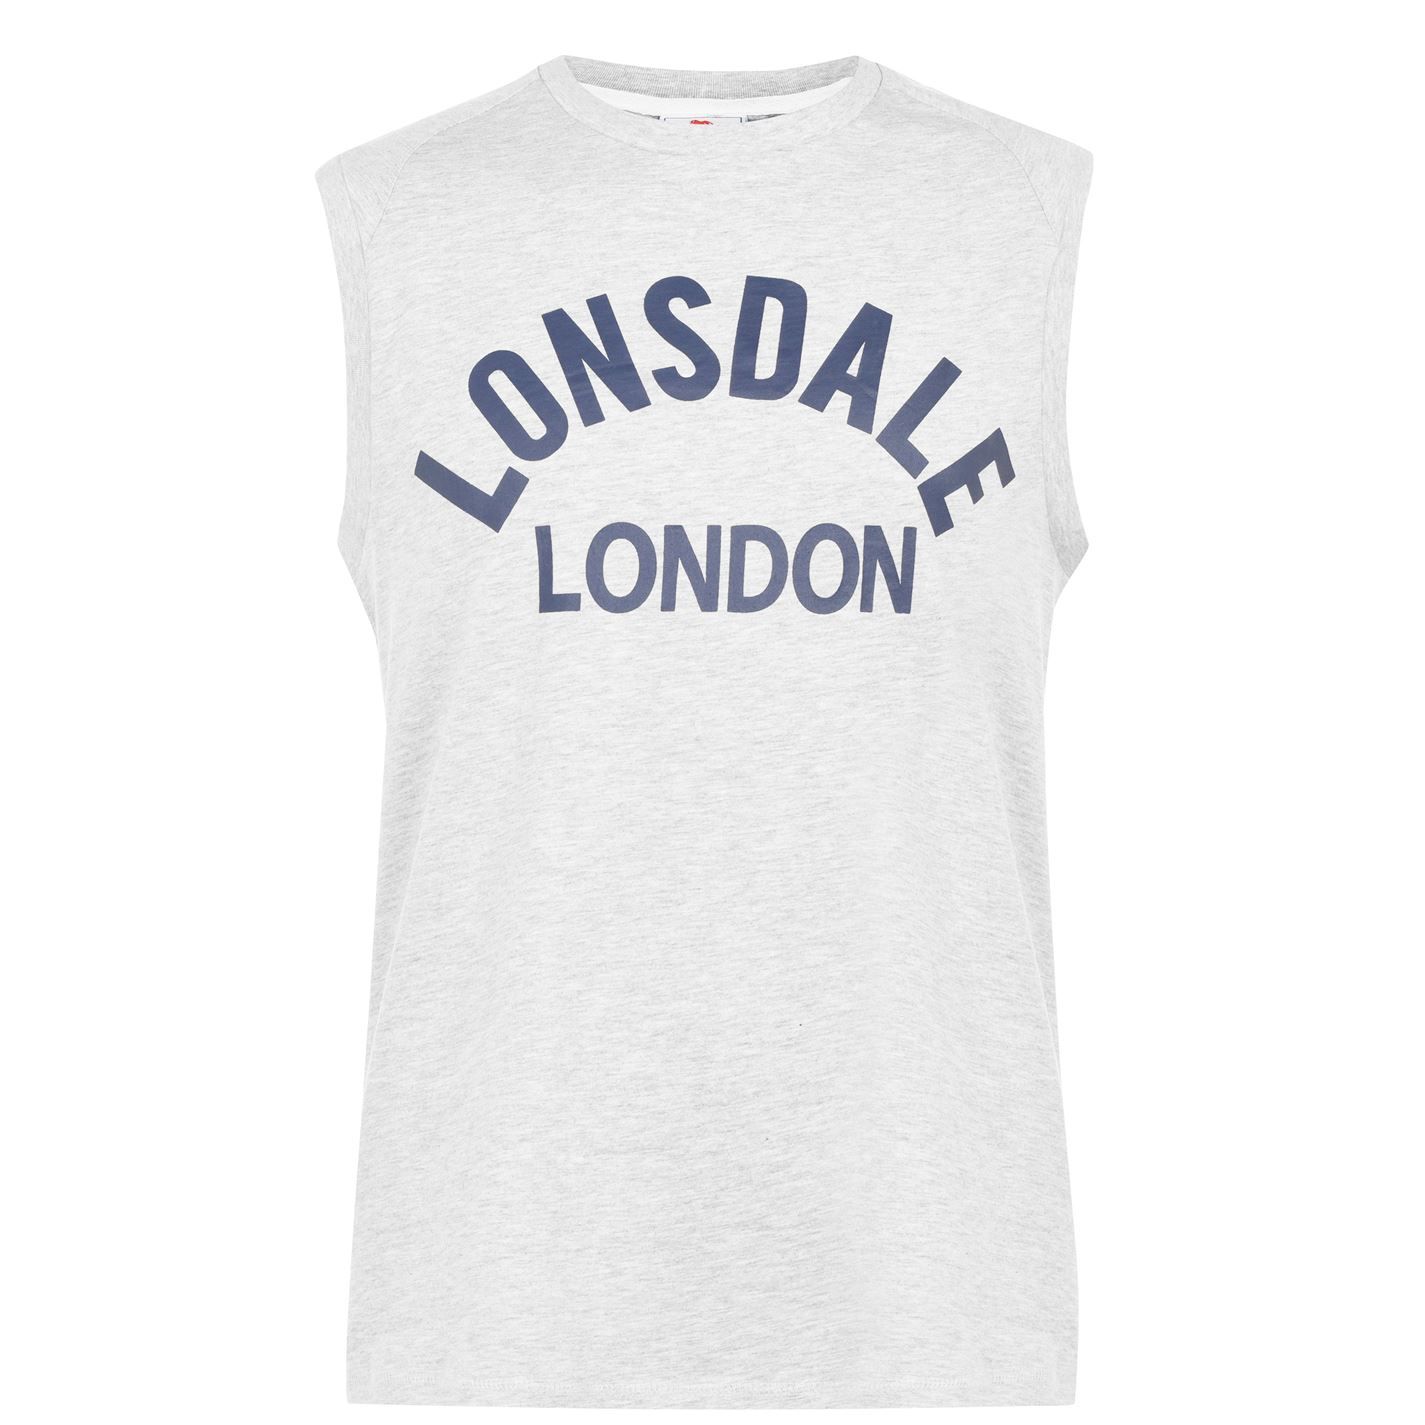 <strong>Lonsdale Box Tank Vest Mens</strong><br><br> This is a classic boxing vest with a crew neck and no sleeves, bigger arm holes so there is no restriction in movement finished off with Lonsdale branding on the front of the vest.<br>> Mens boxing vest<br>> Crew neck<br>> No sleeves<br>> Soft fabrics<br>> Regular fit<br>> Lonsdale Branding<br>> 100% cotton<br>> Machine washable<br>> Keep away from fire